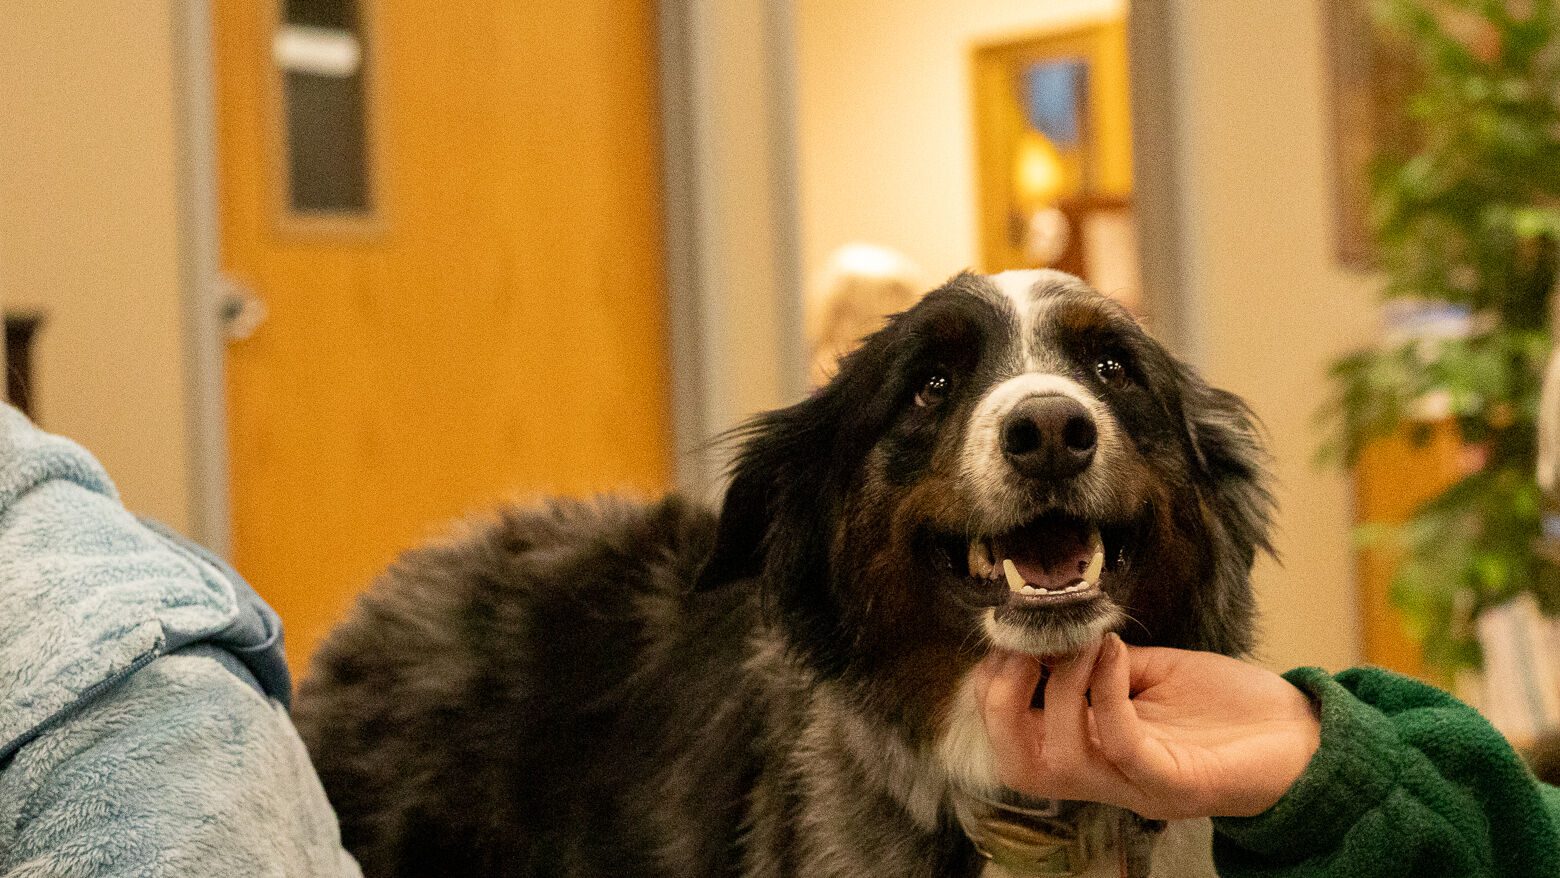 Dog having their chin scratched during therapy dog event.